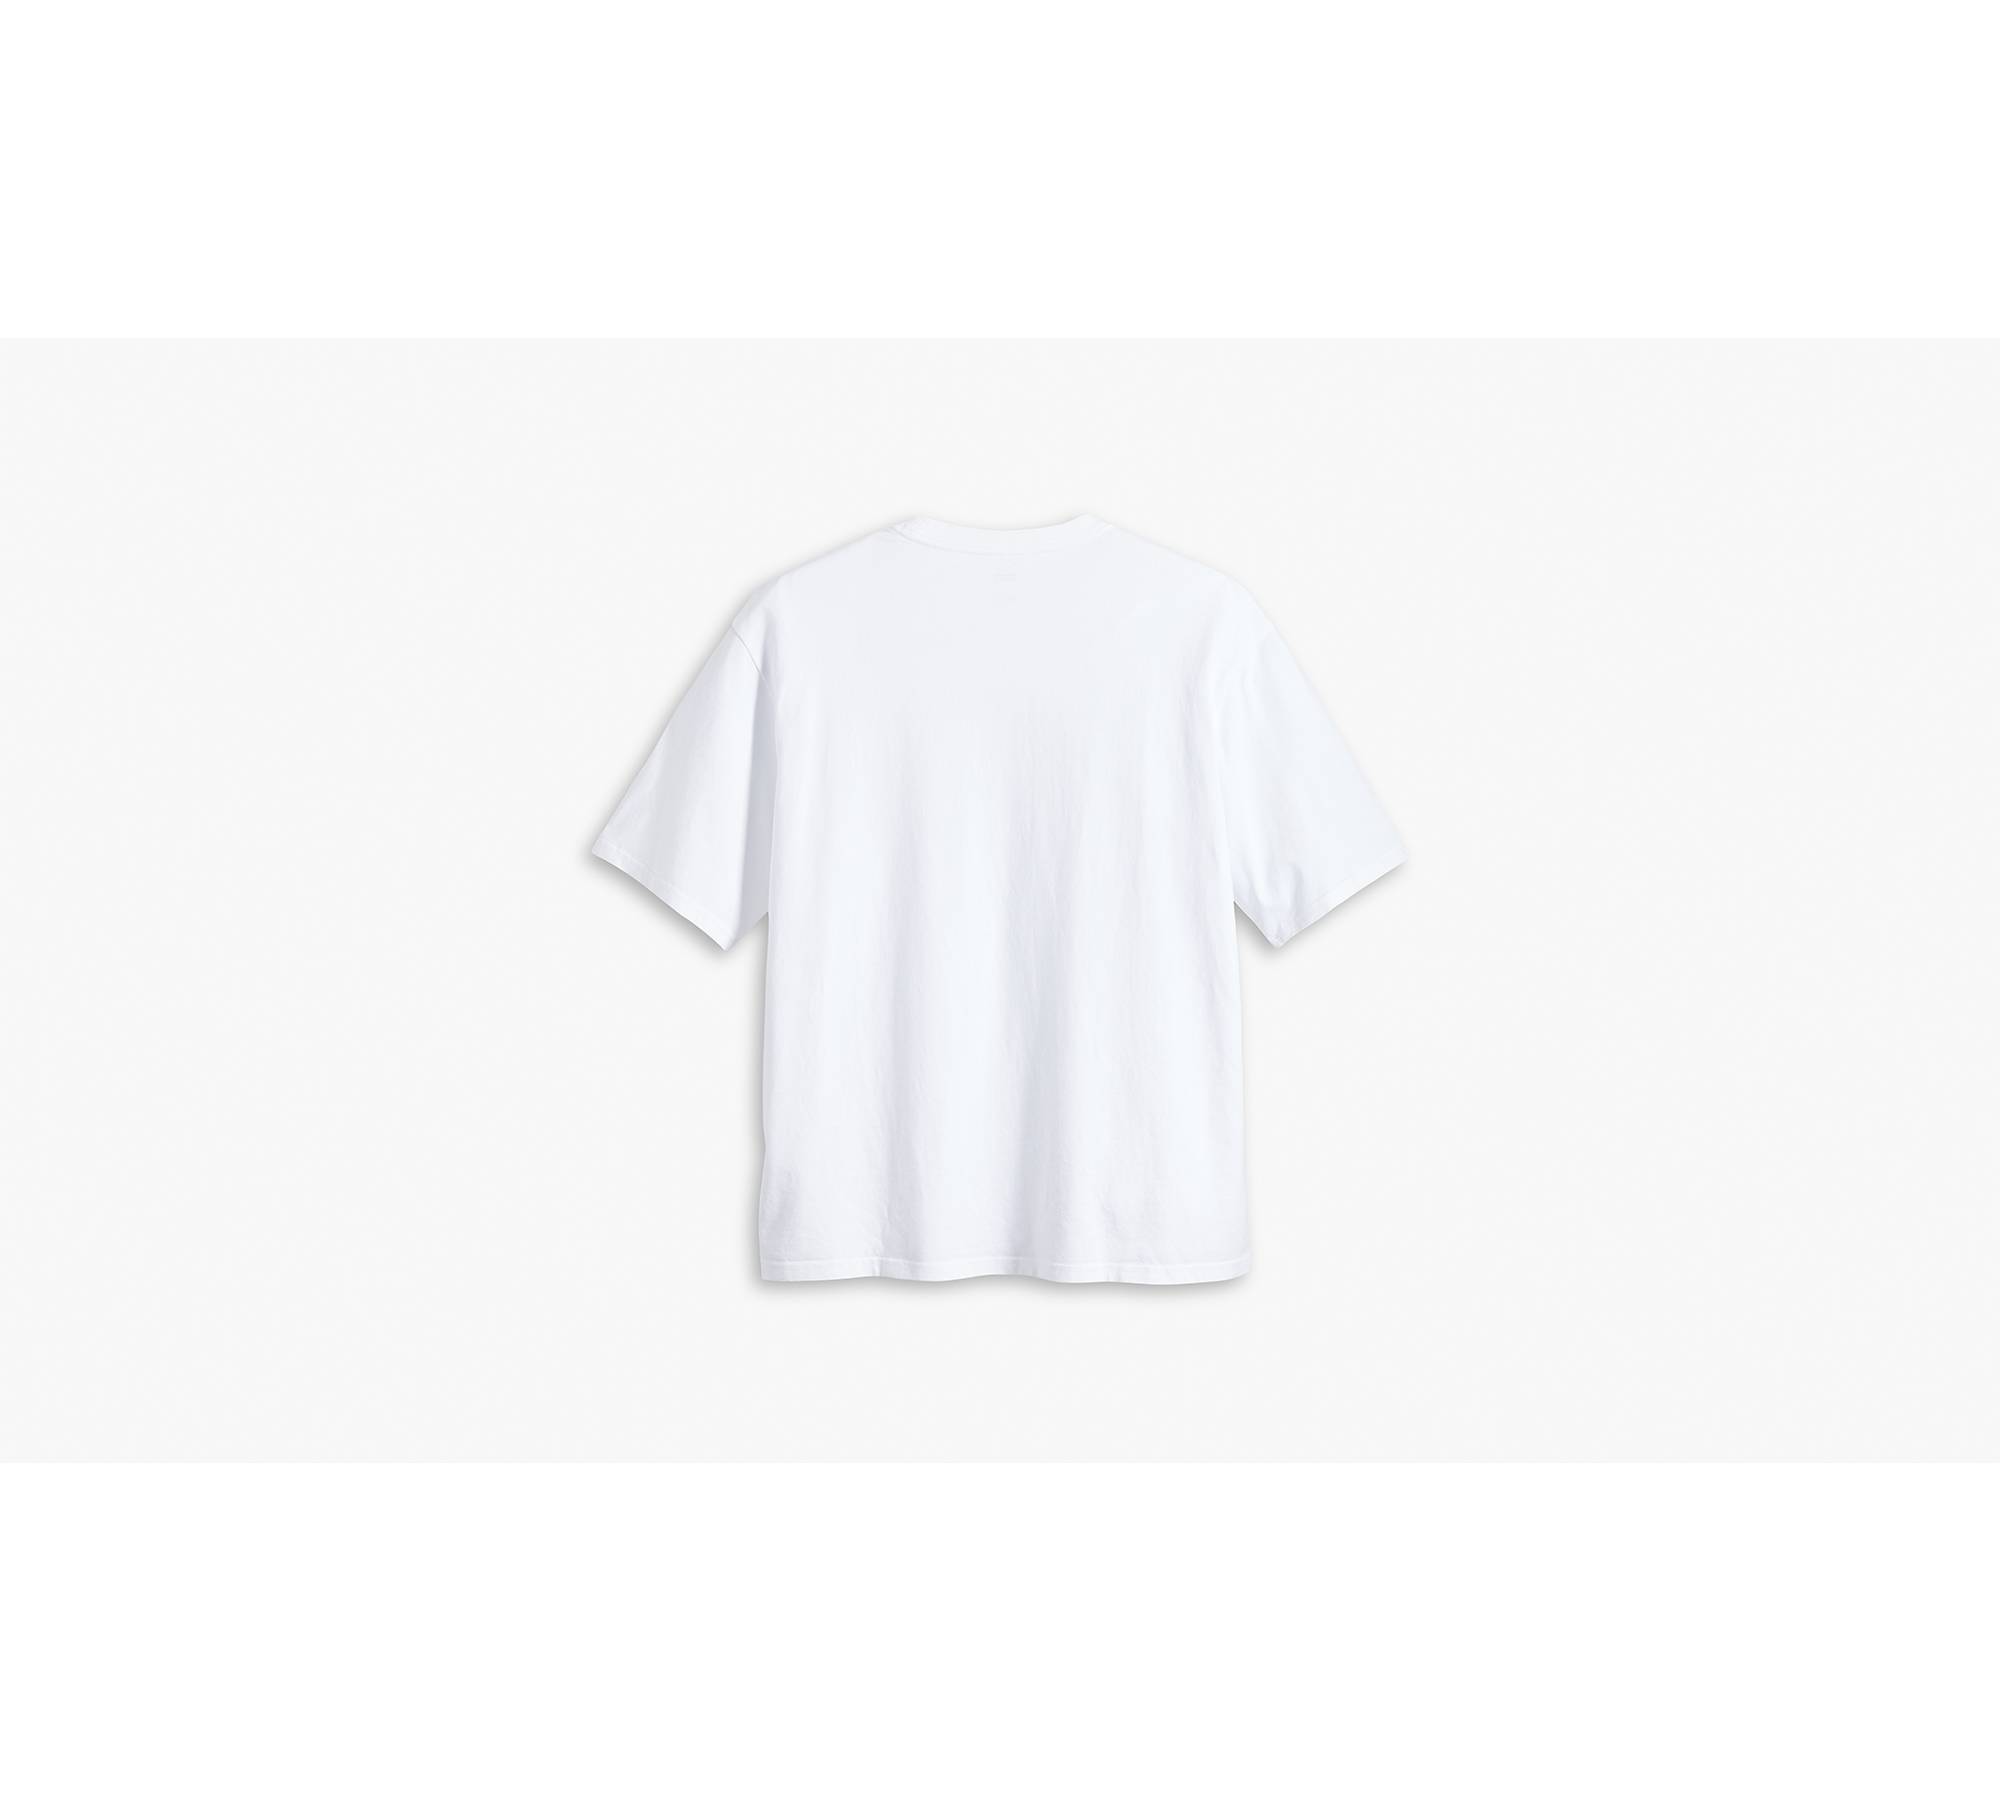 Relaxed Half Sleeve T-shirt - Brown | Levi's® US